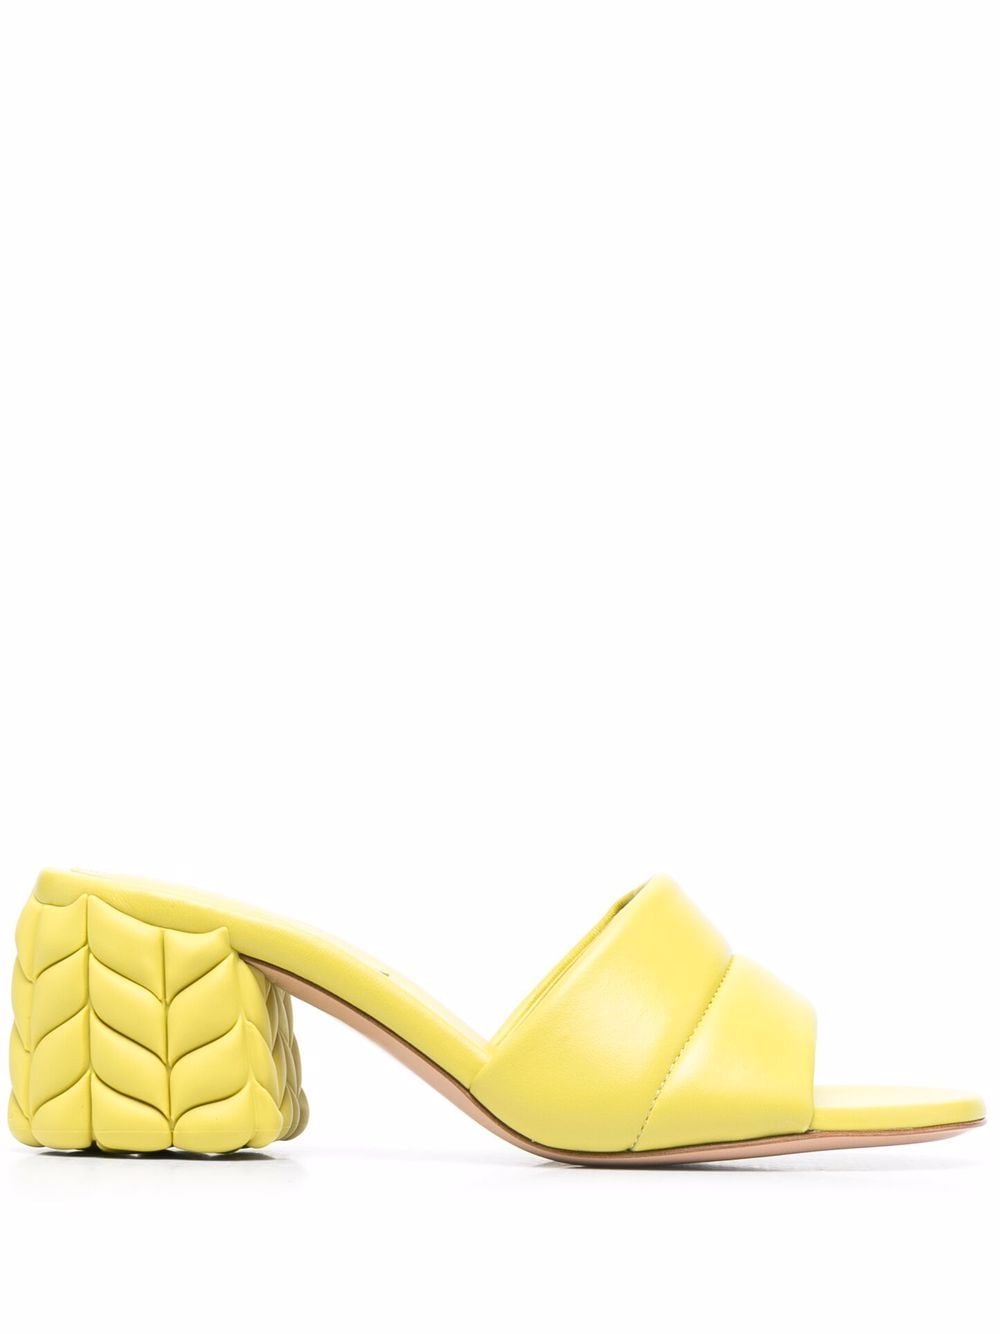 Gianvito Rossi Padded Leather Sandals - Farfetch